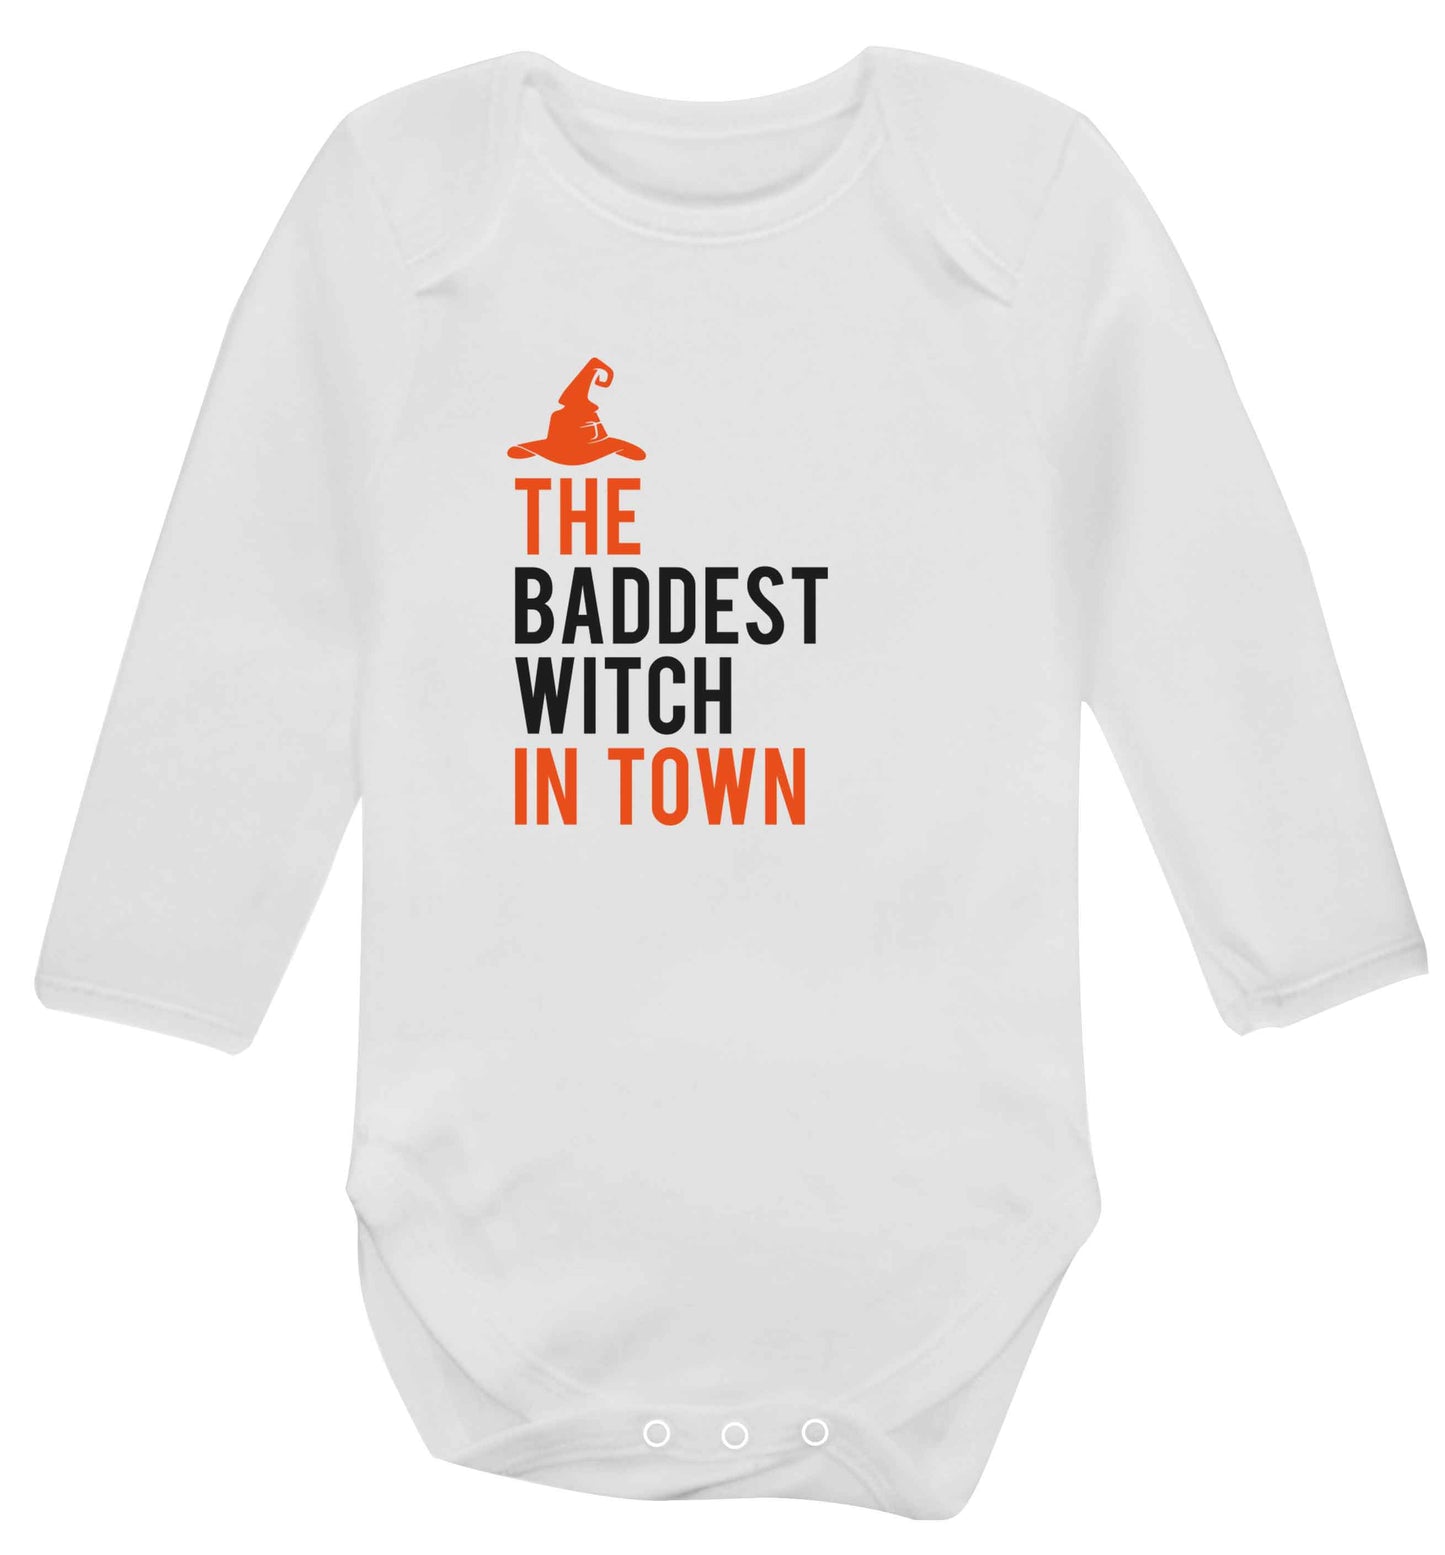 Badest witch in town baby vest long sleeved white 6-12 months